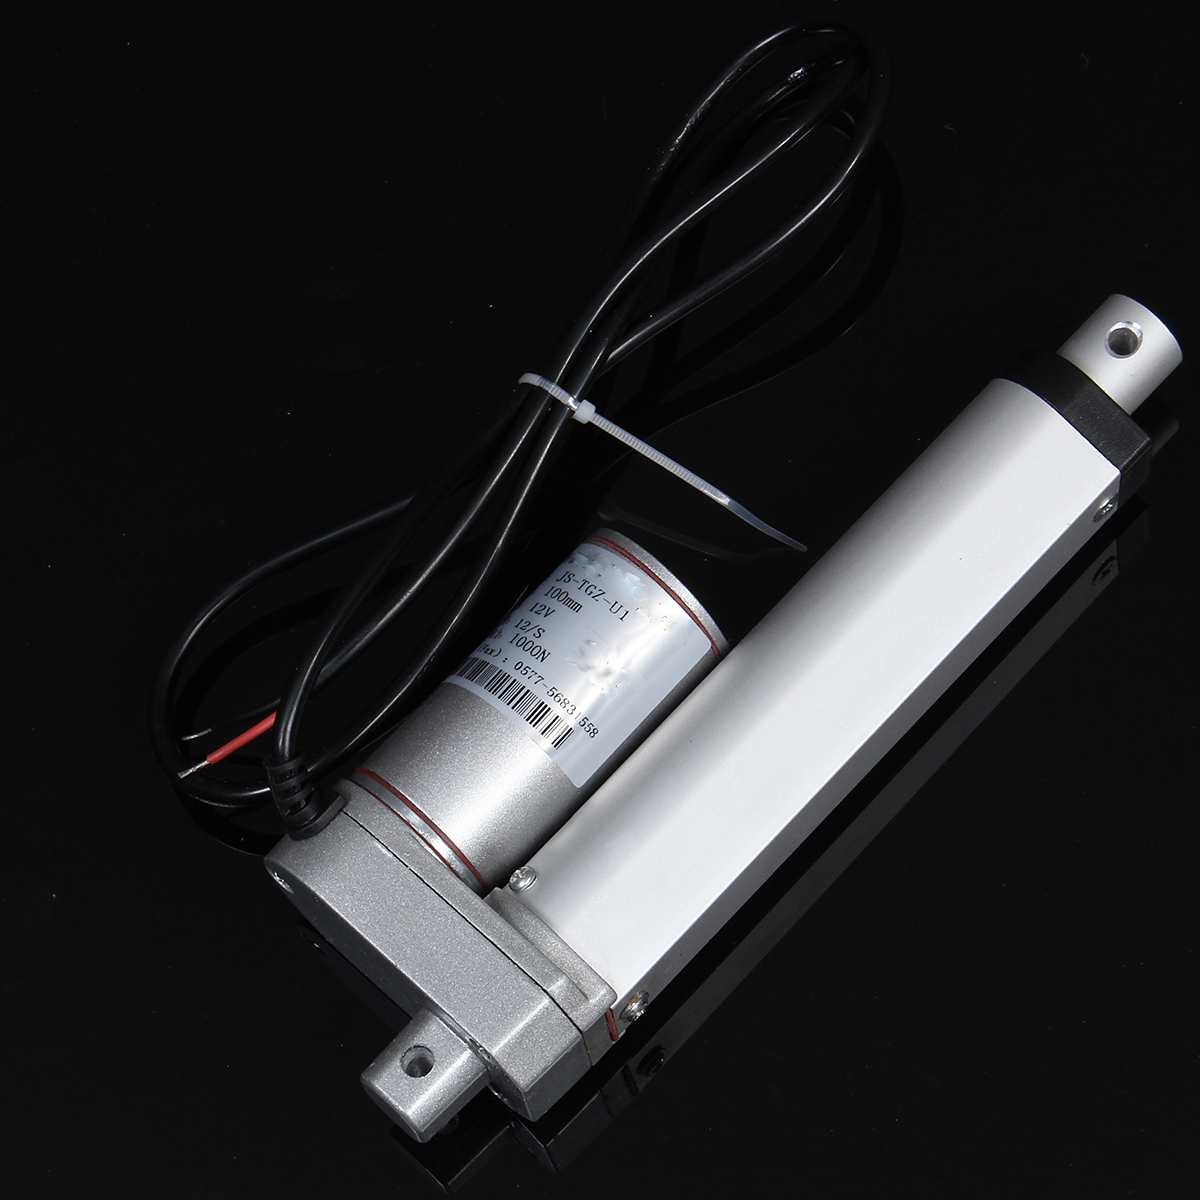 DC 12V Electric Linear Actuator 1000N 50-500mm Stroke Linear Motor Controller 12mm/s Electric Bracket 2"/4"/6"/8"/16"/20"